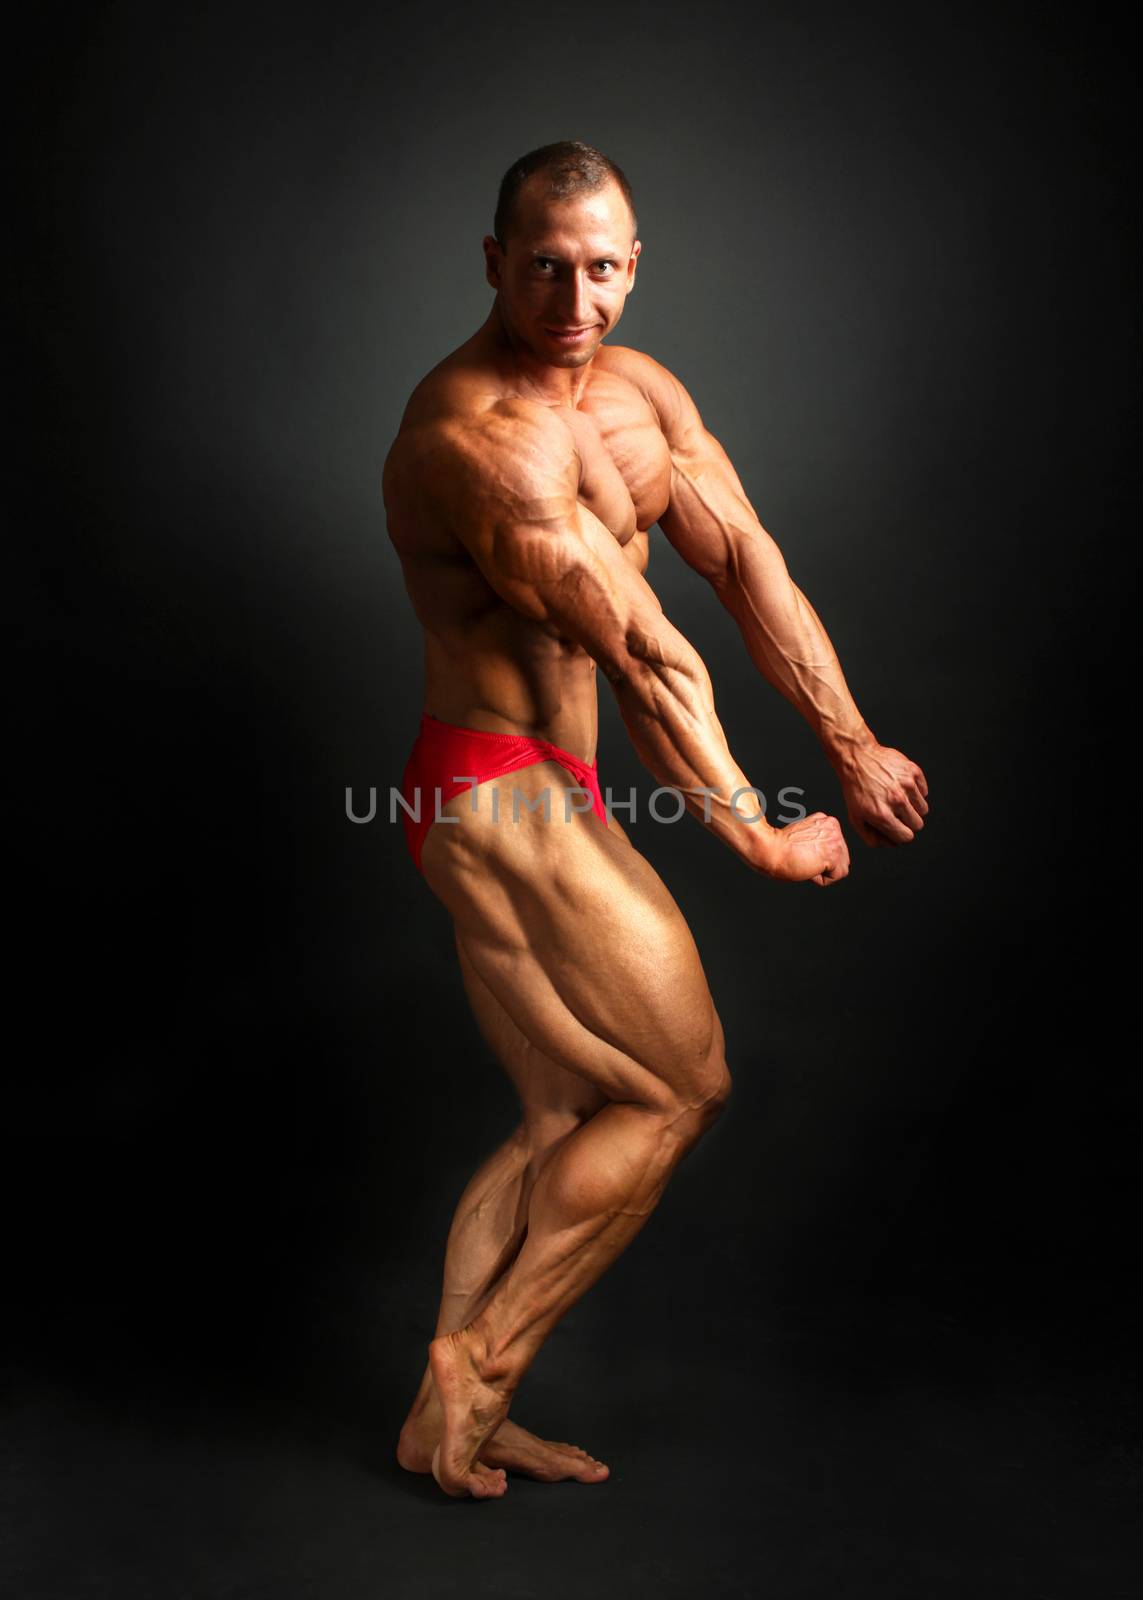 Studio shot of male bodybuilder posing, showing front and side m by Ivanko